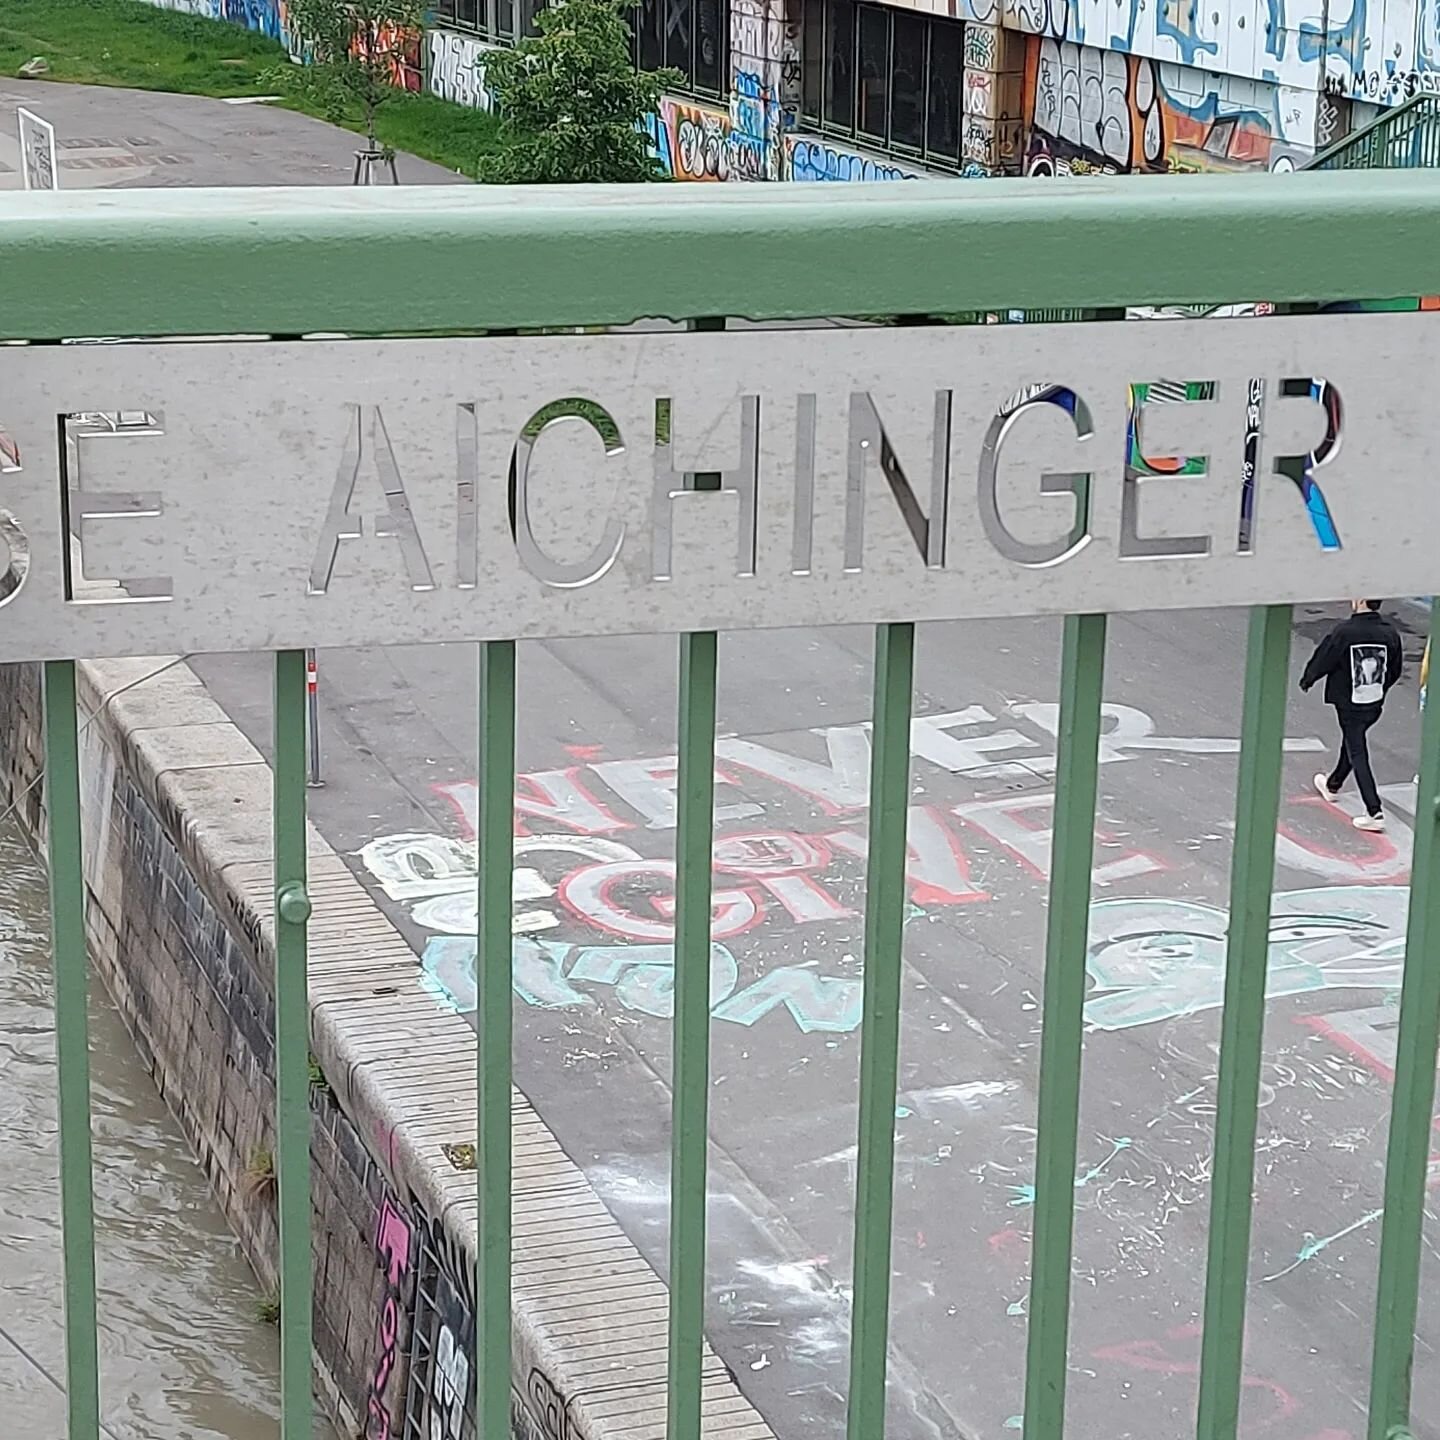 Still in Vienna I visit the bridge where the gran of @nestbex has a poem embossed into the railing. On this spot Ilse Aichinger had to witness members of her family being taken away in an open truck, to be murdered, before she was sent to England on 